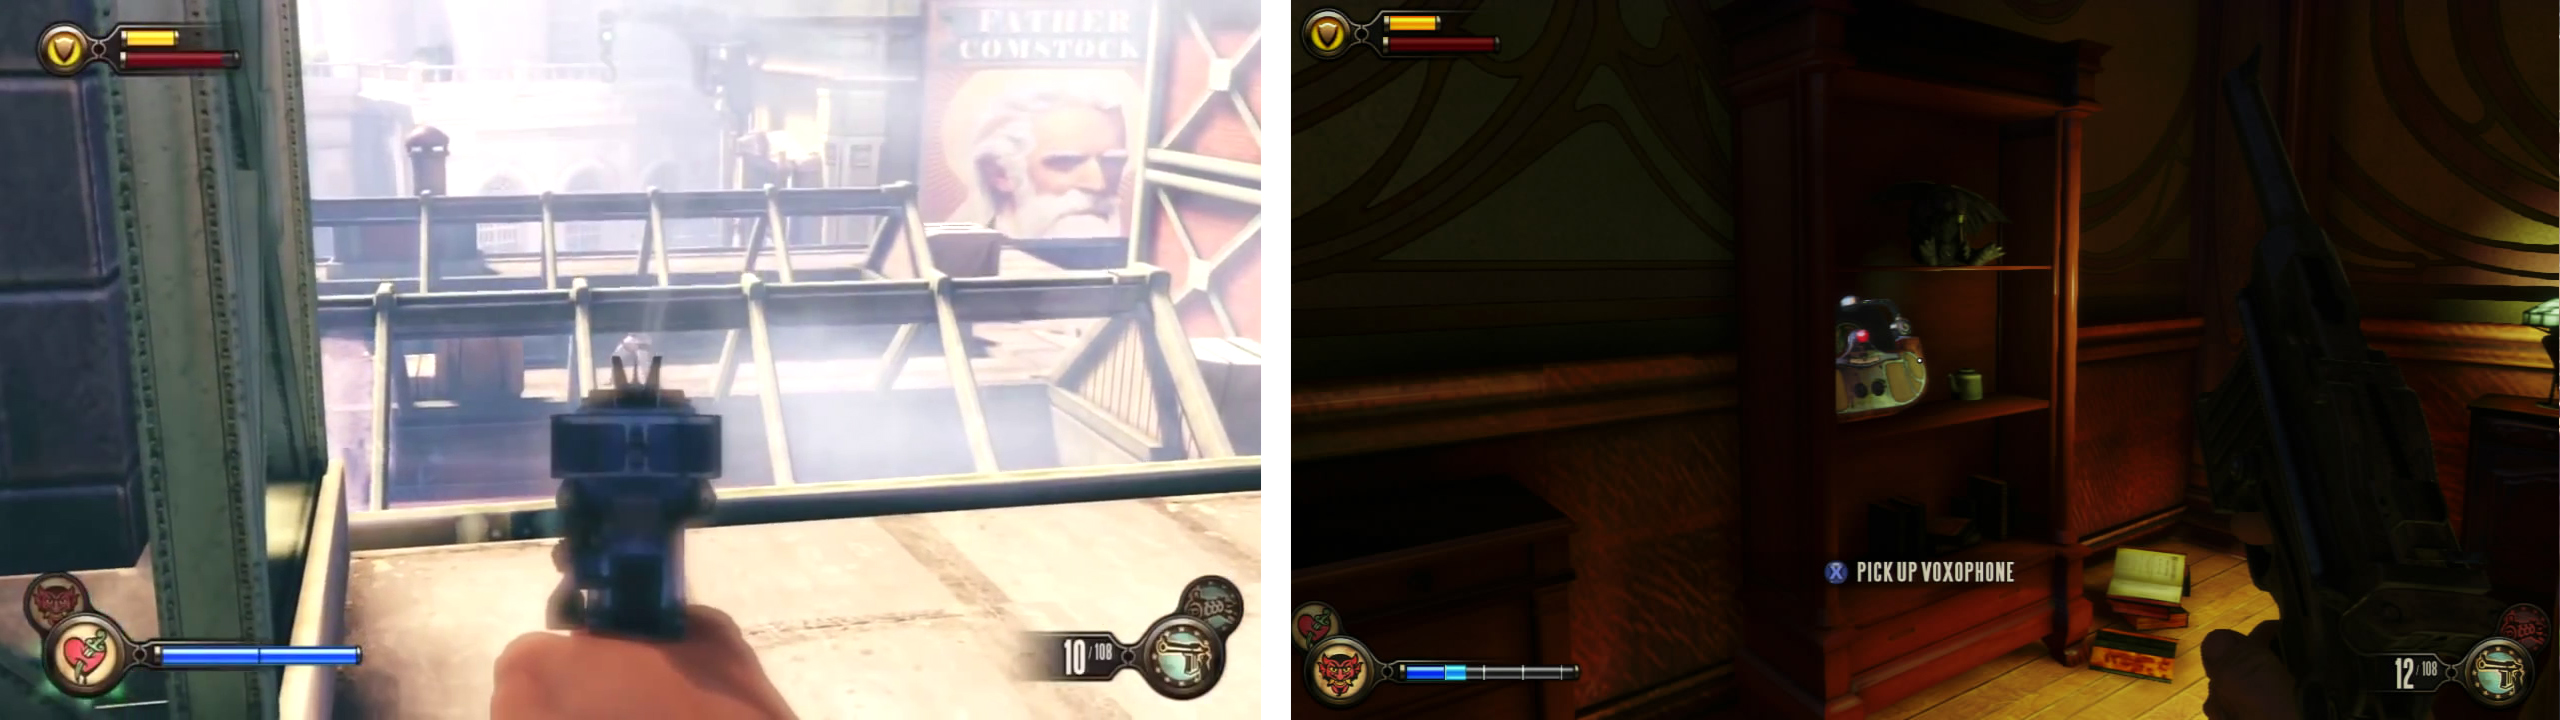 Drop down through the sky lights (left) and find the Voxophone in a downstairs room (right).